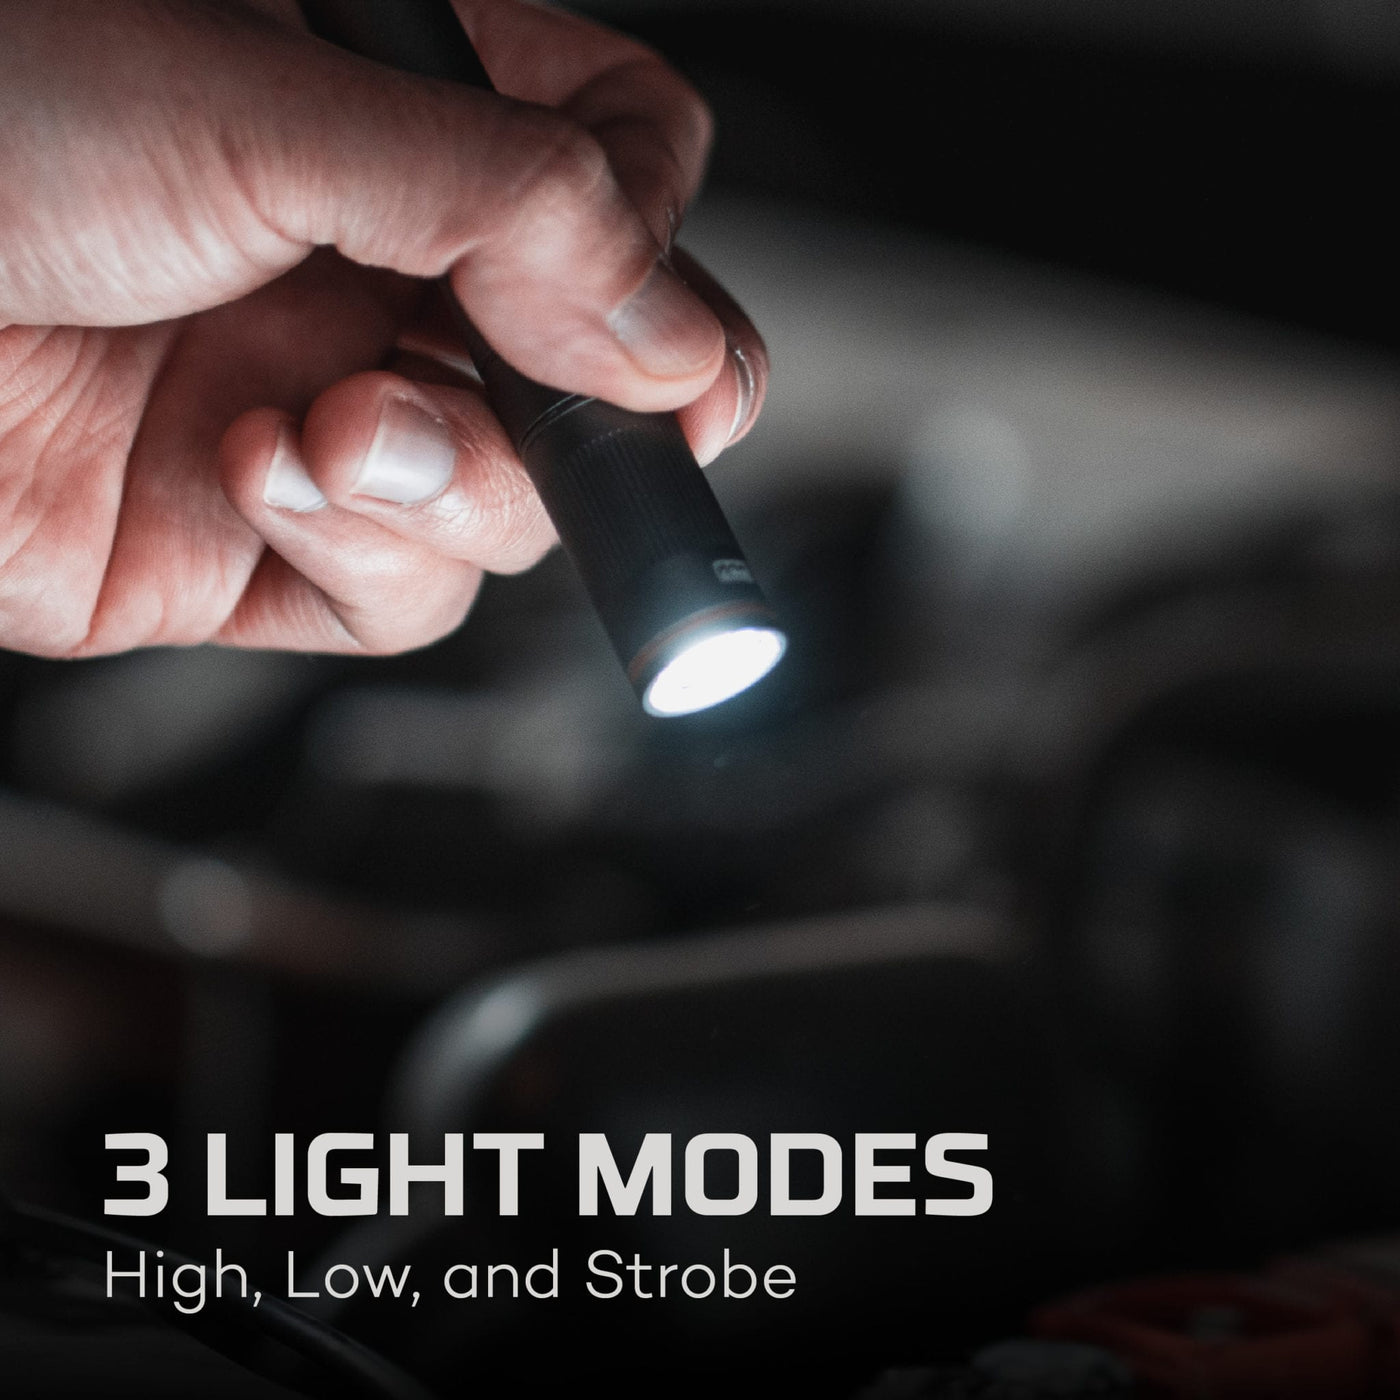 At Nebo Tools, we continually innovate so that we can offer the highest quality LED lighting products at the best price. The Columbo™ 100 torch features a 100 lumen LED, 3 light modes, 4x adjustable zoom, Easy Touch Technology, strong steel clip, and a waterproof (IP67) anodized aircraft-grade aluminium body. The included AAA alkaline batteries allow for up to 4.5 hours of operation.